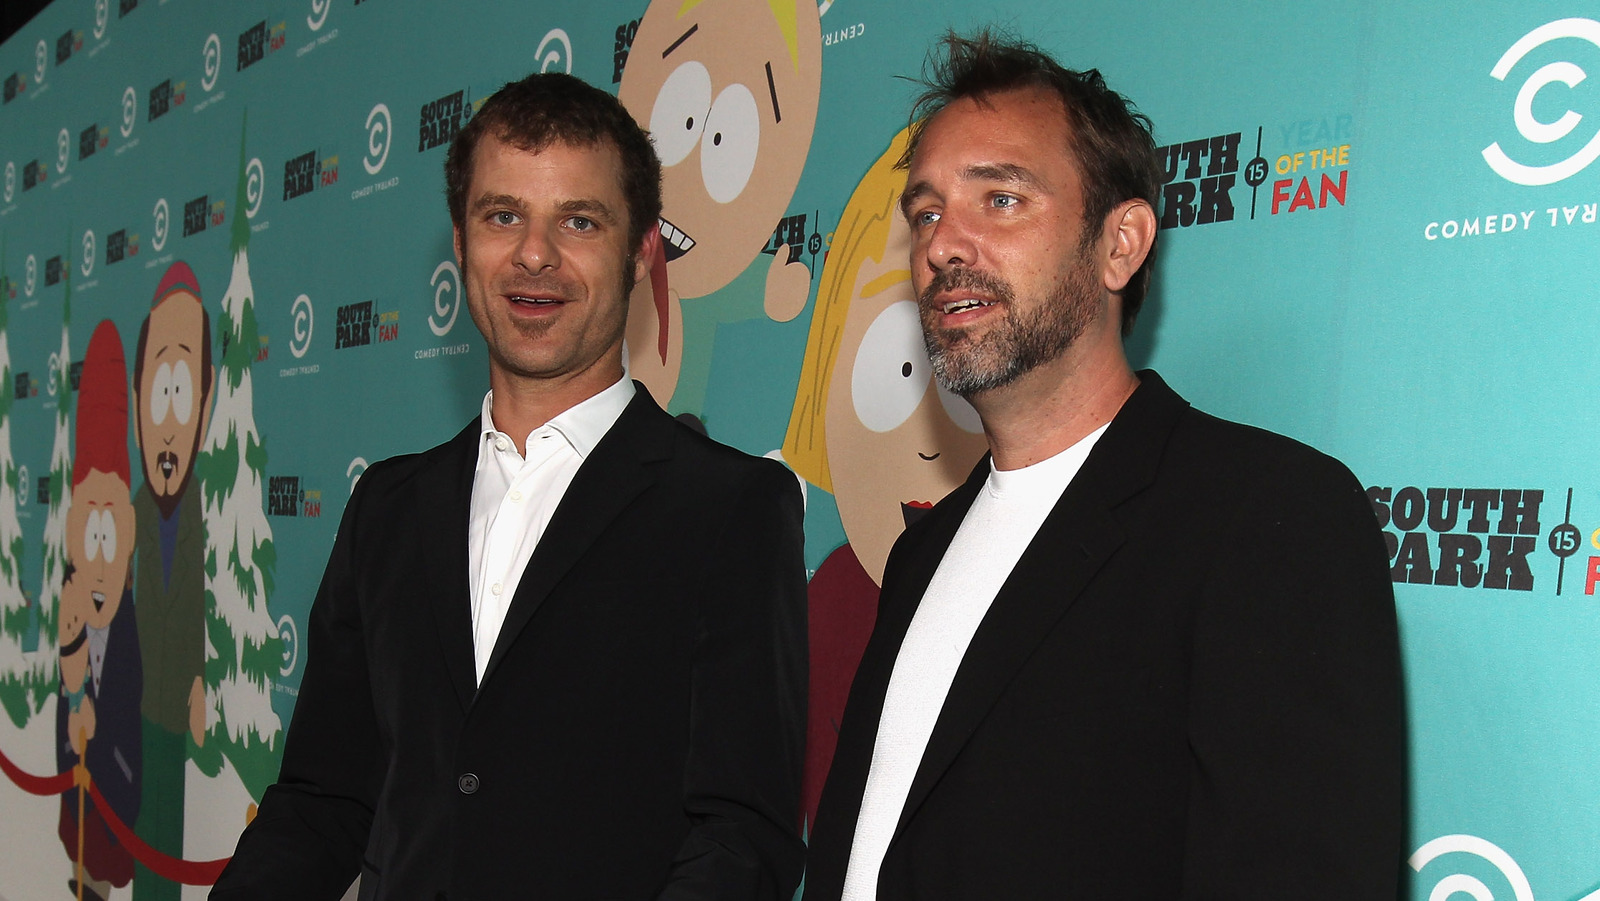 South Park' Creators Trey Parker and Matt Stone Once Said There